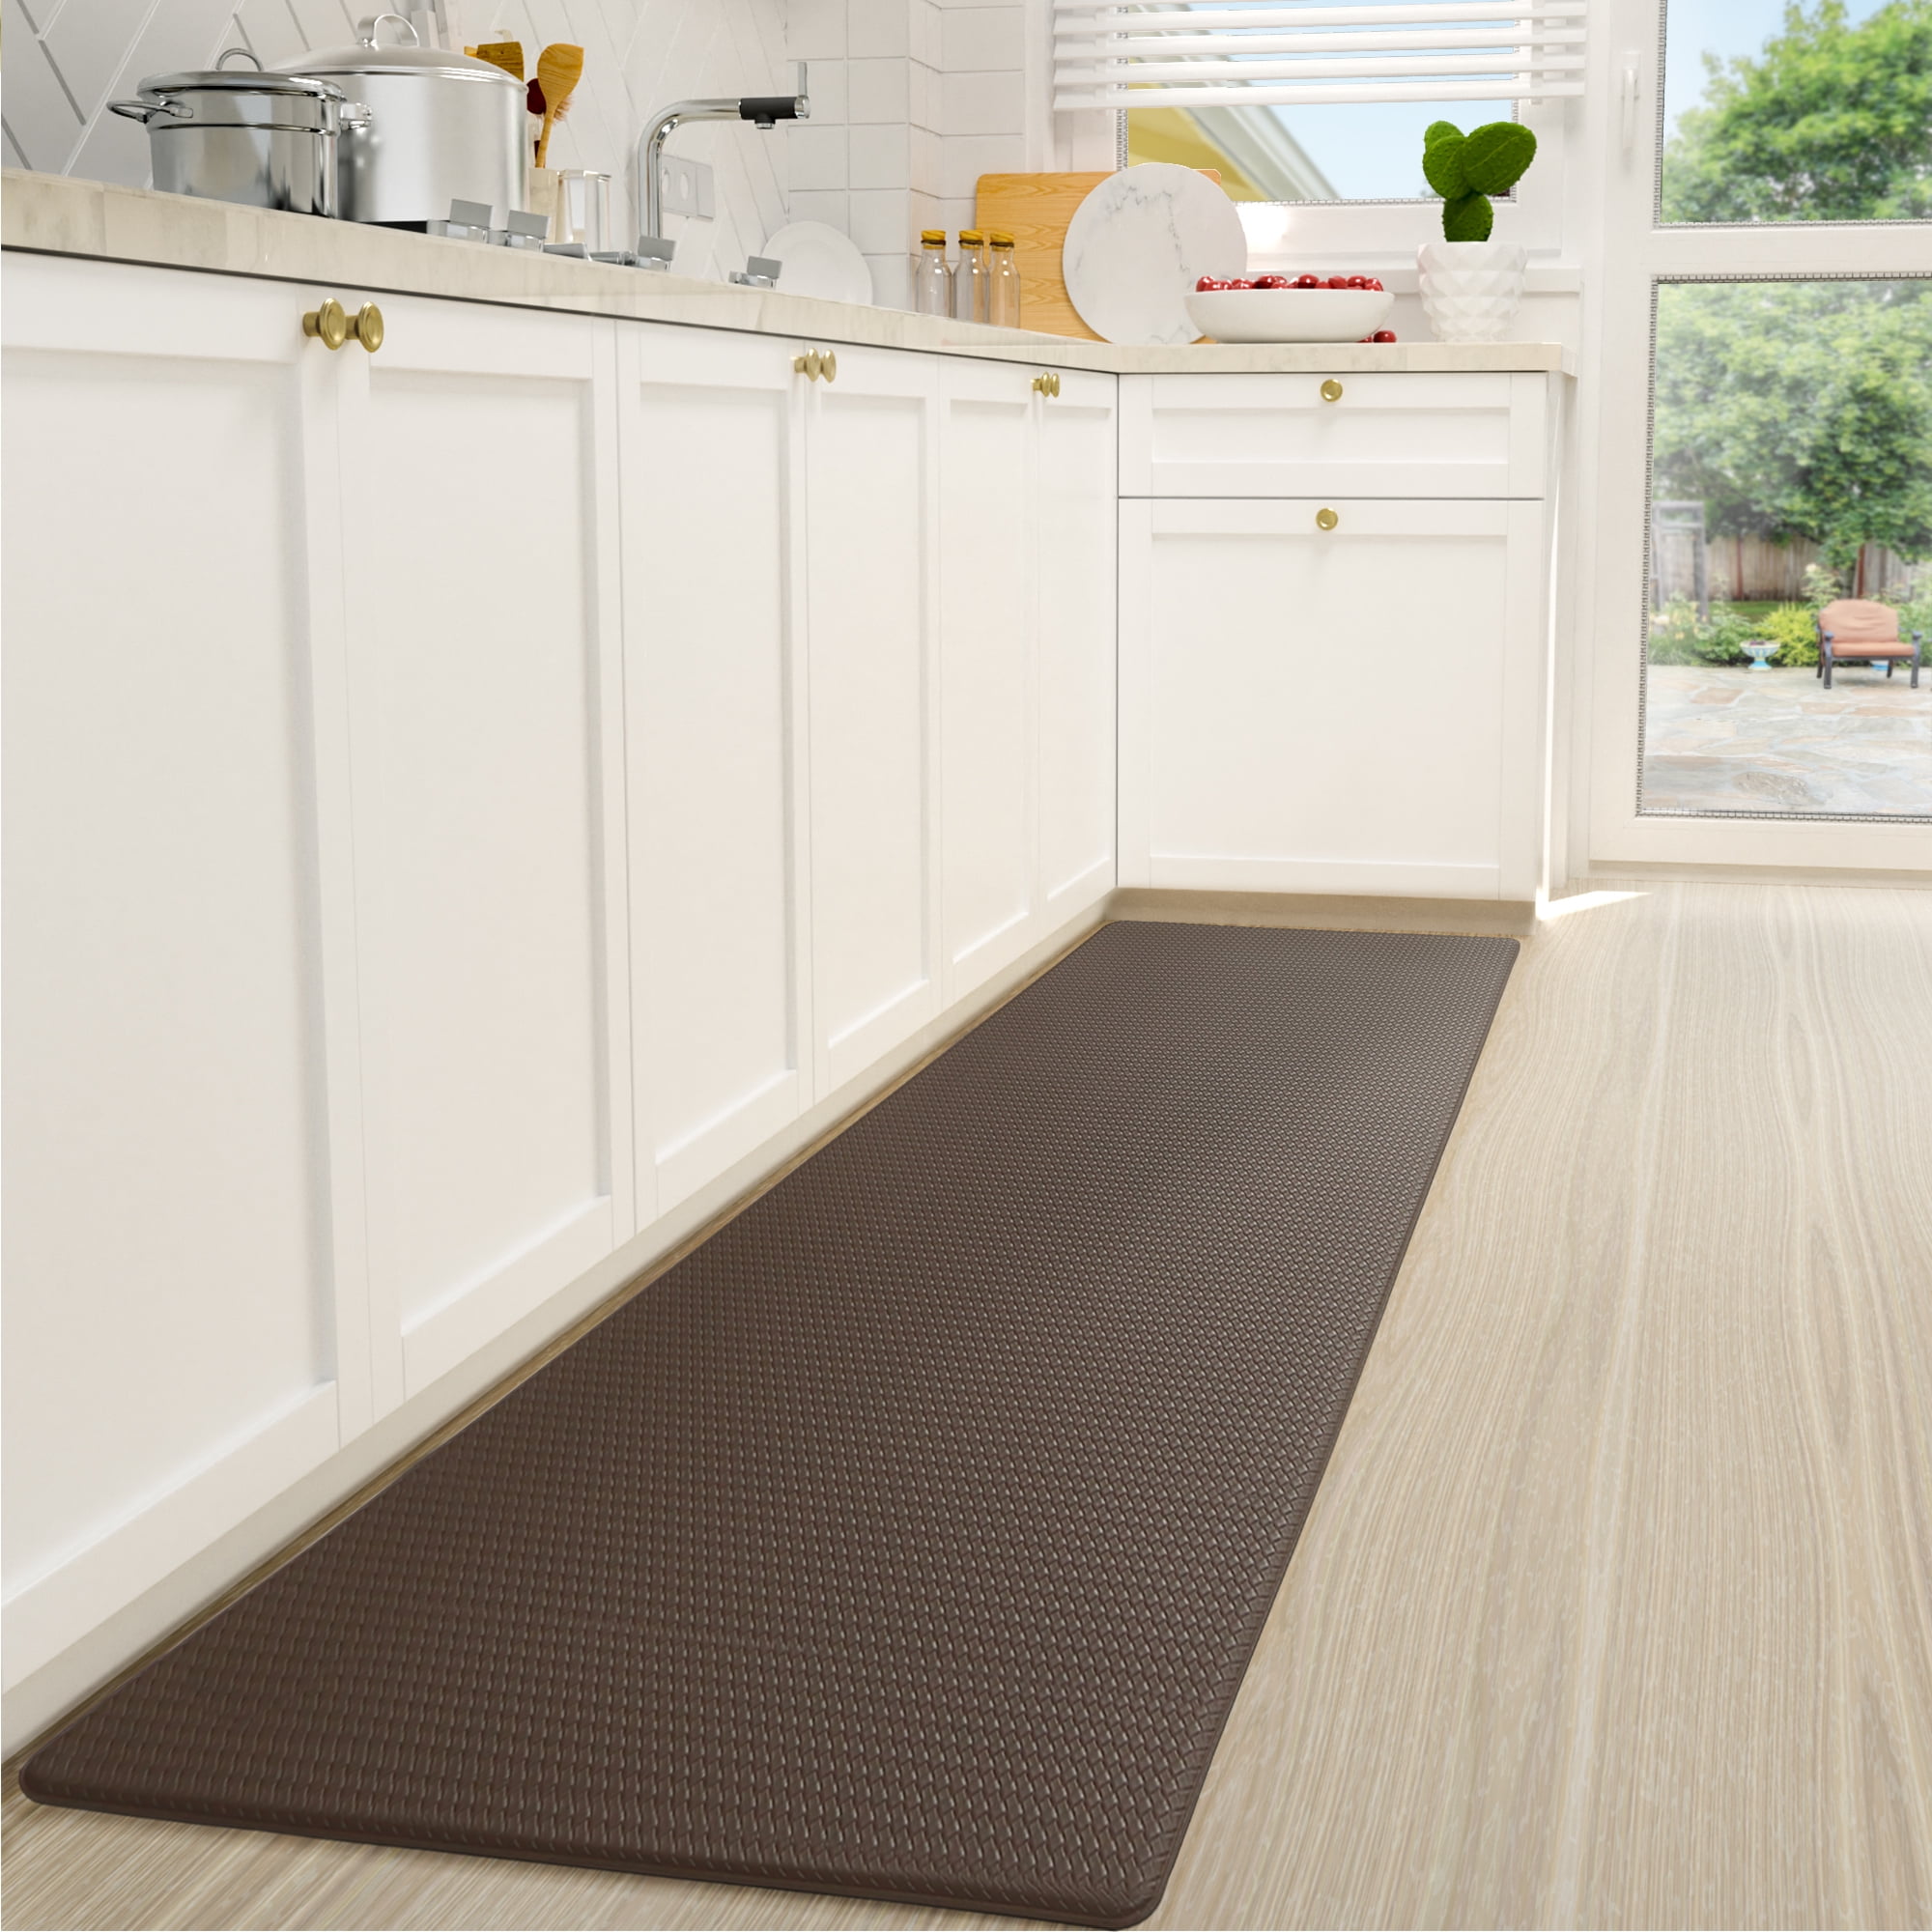 Color G Kitchen Rug, Anti Fatigue Mat for Kitchen, Non Skid Kitchen Floor Mat, Kitchen Rug or Mat Washable, 17"x 79", Brown